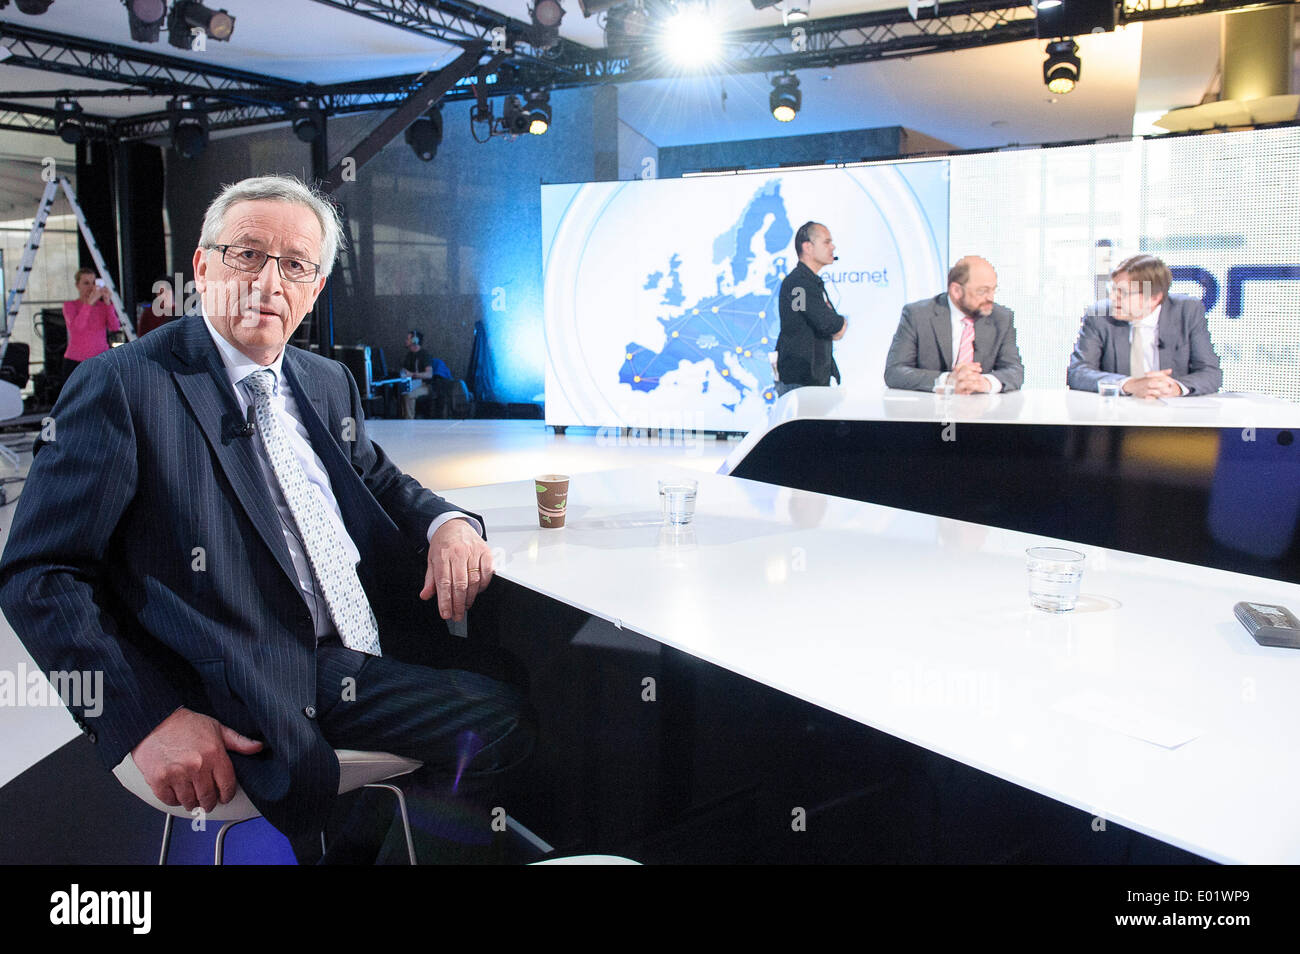 Brussels, Belgium. 29th April 2014. Guy Verhofstadt (R ), top candidate of Liberals (ALDE) and Martin Schulz (C ), top candidate of the Party of European Socialists (PSE) and Jean-Claude Juncker, top candidate for European People's Party (EPP) (L) during Euranet's 'Big Crunch' Presidential debate at the EU parliament in BrusselsThe four top candidates for the presidency of the European Commission - Jean-Claude Juncker, Ska Keller, Martin Schulz and Guy Verhofstadt - attend EU-wide debate organized by EuranetPlus and focused on the major election topics. by Wiktor Dabkow © dpa picture alliance/ Stock Photo